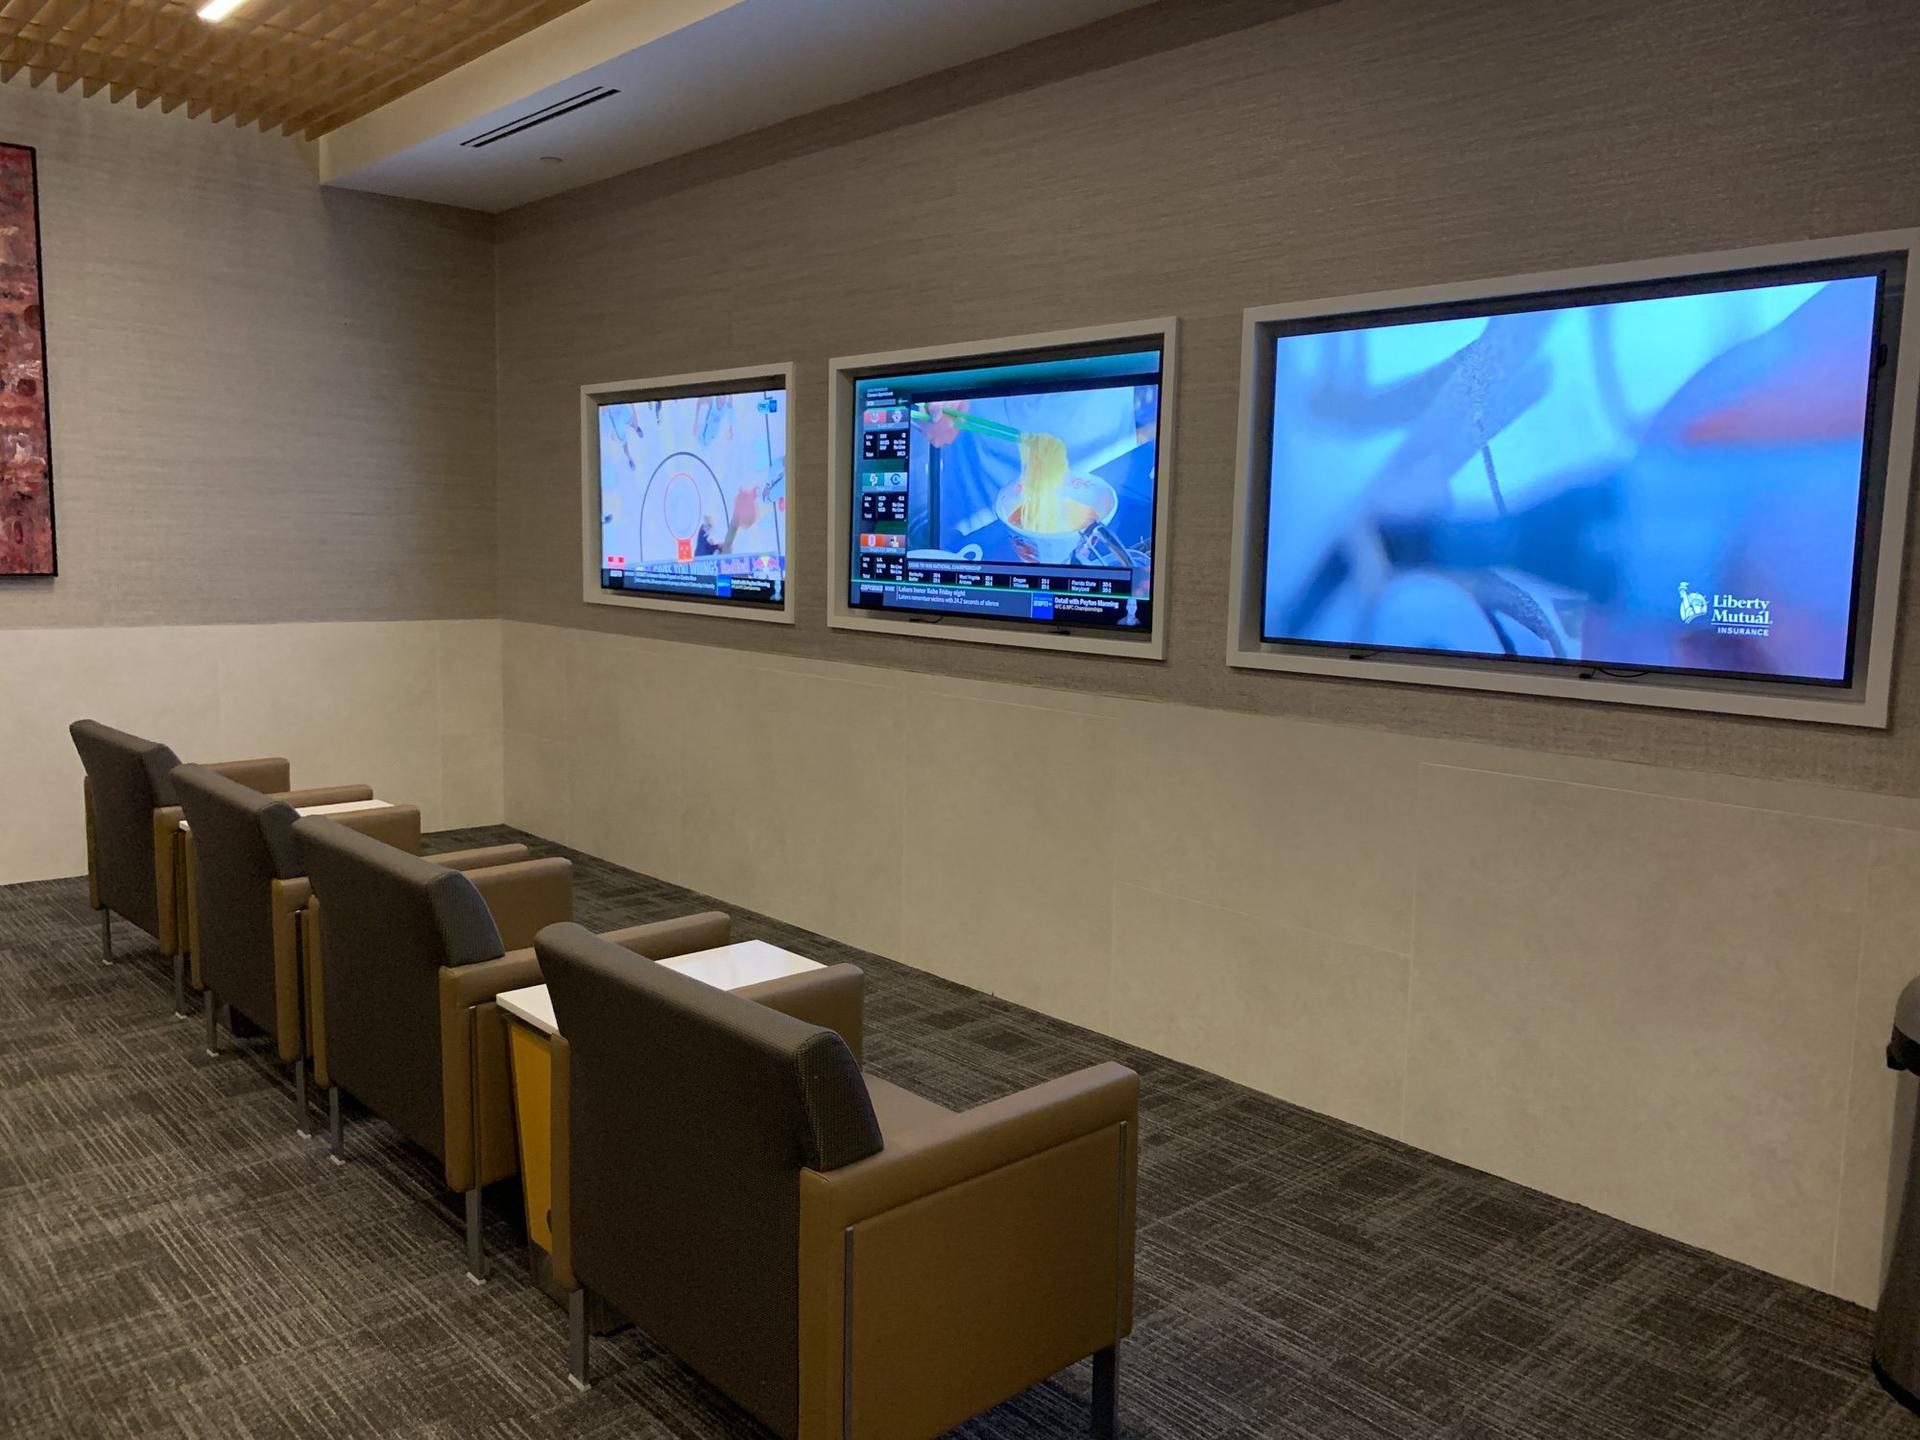 American Airlines Flagship Lounge image 39 of 55